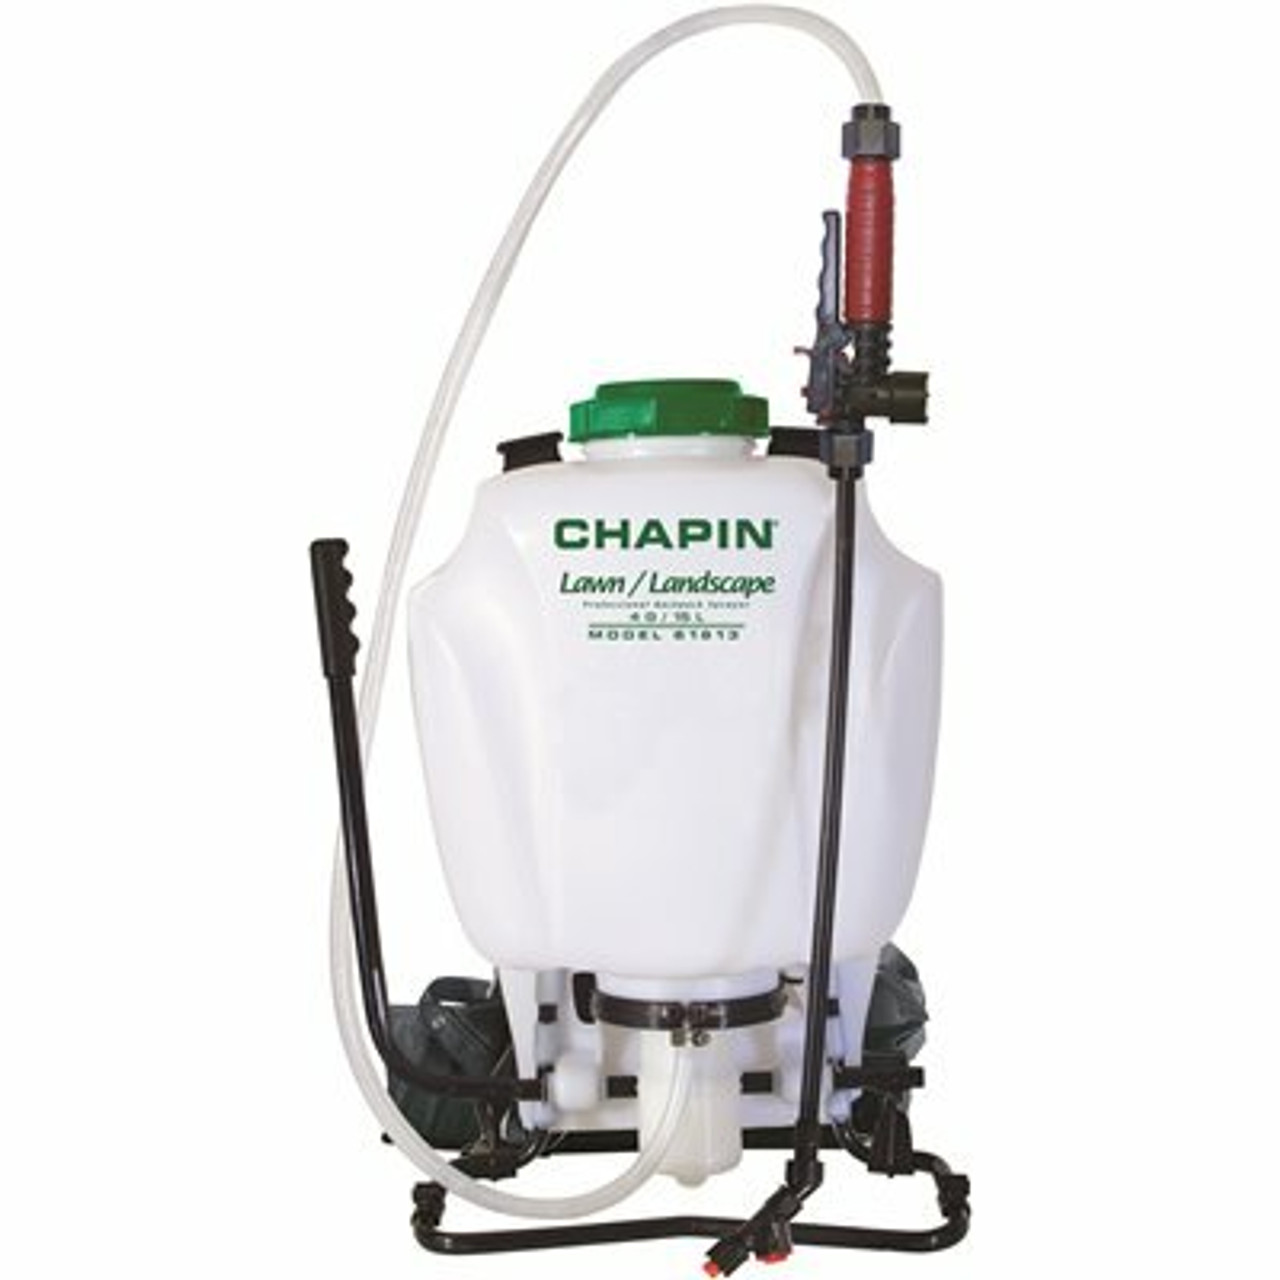 Chapin 4 Gal. Lawn And Landscape Pro Backpack Sprayer With Control Flow Technology